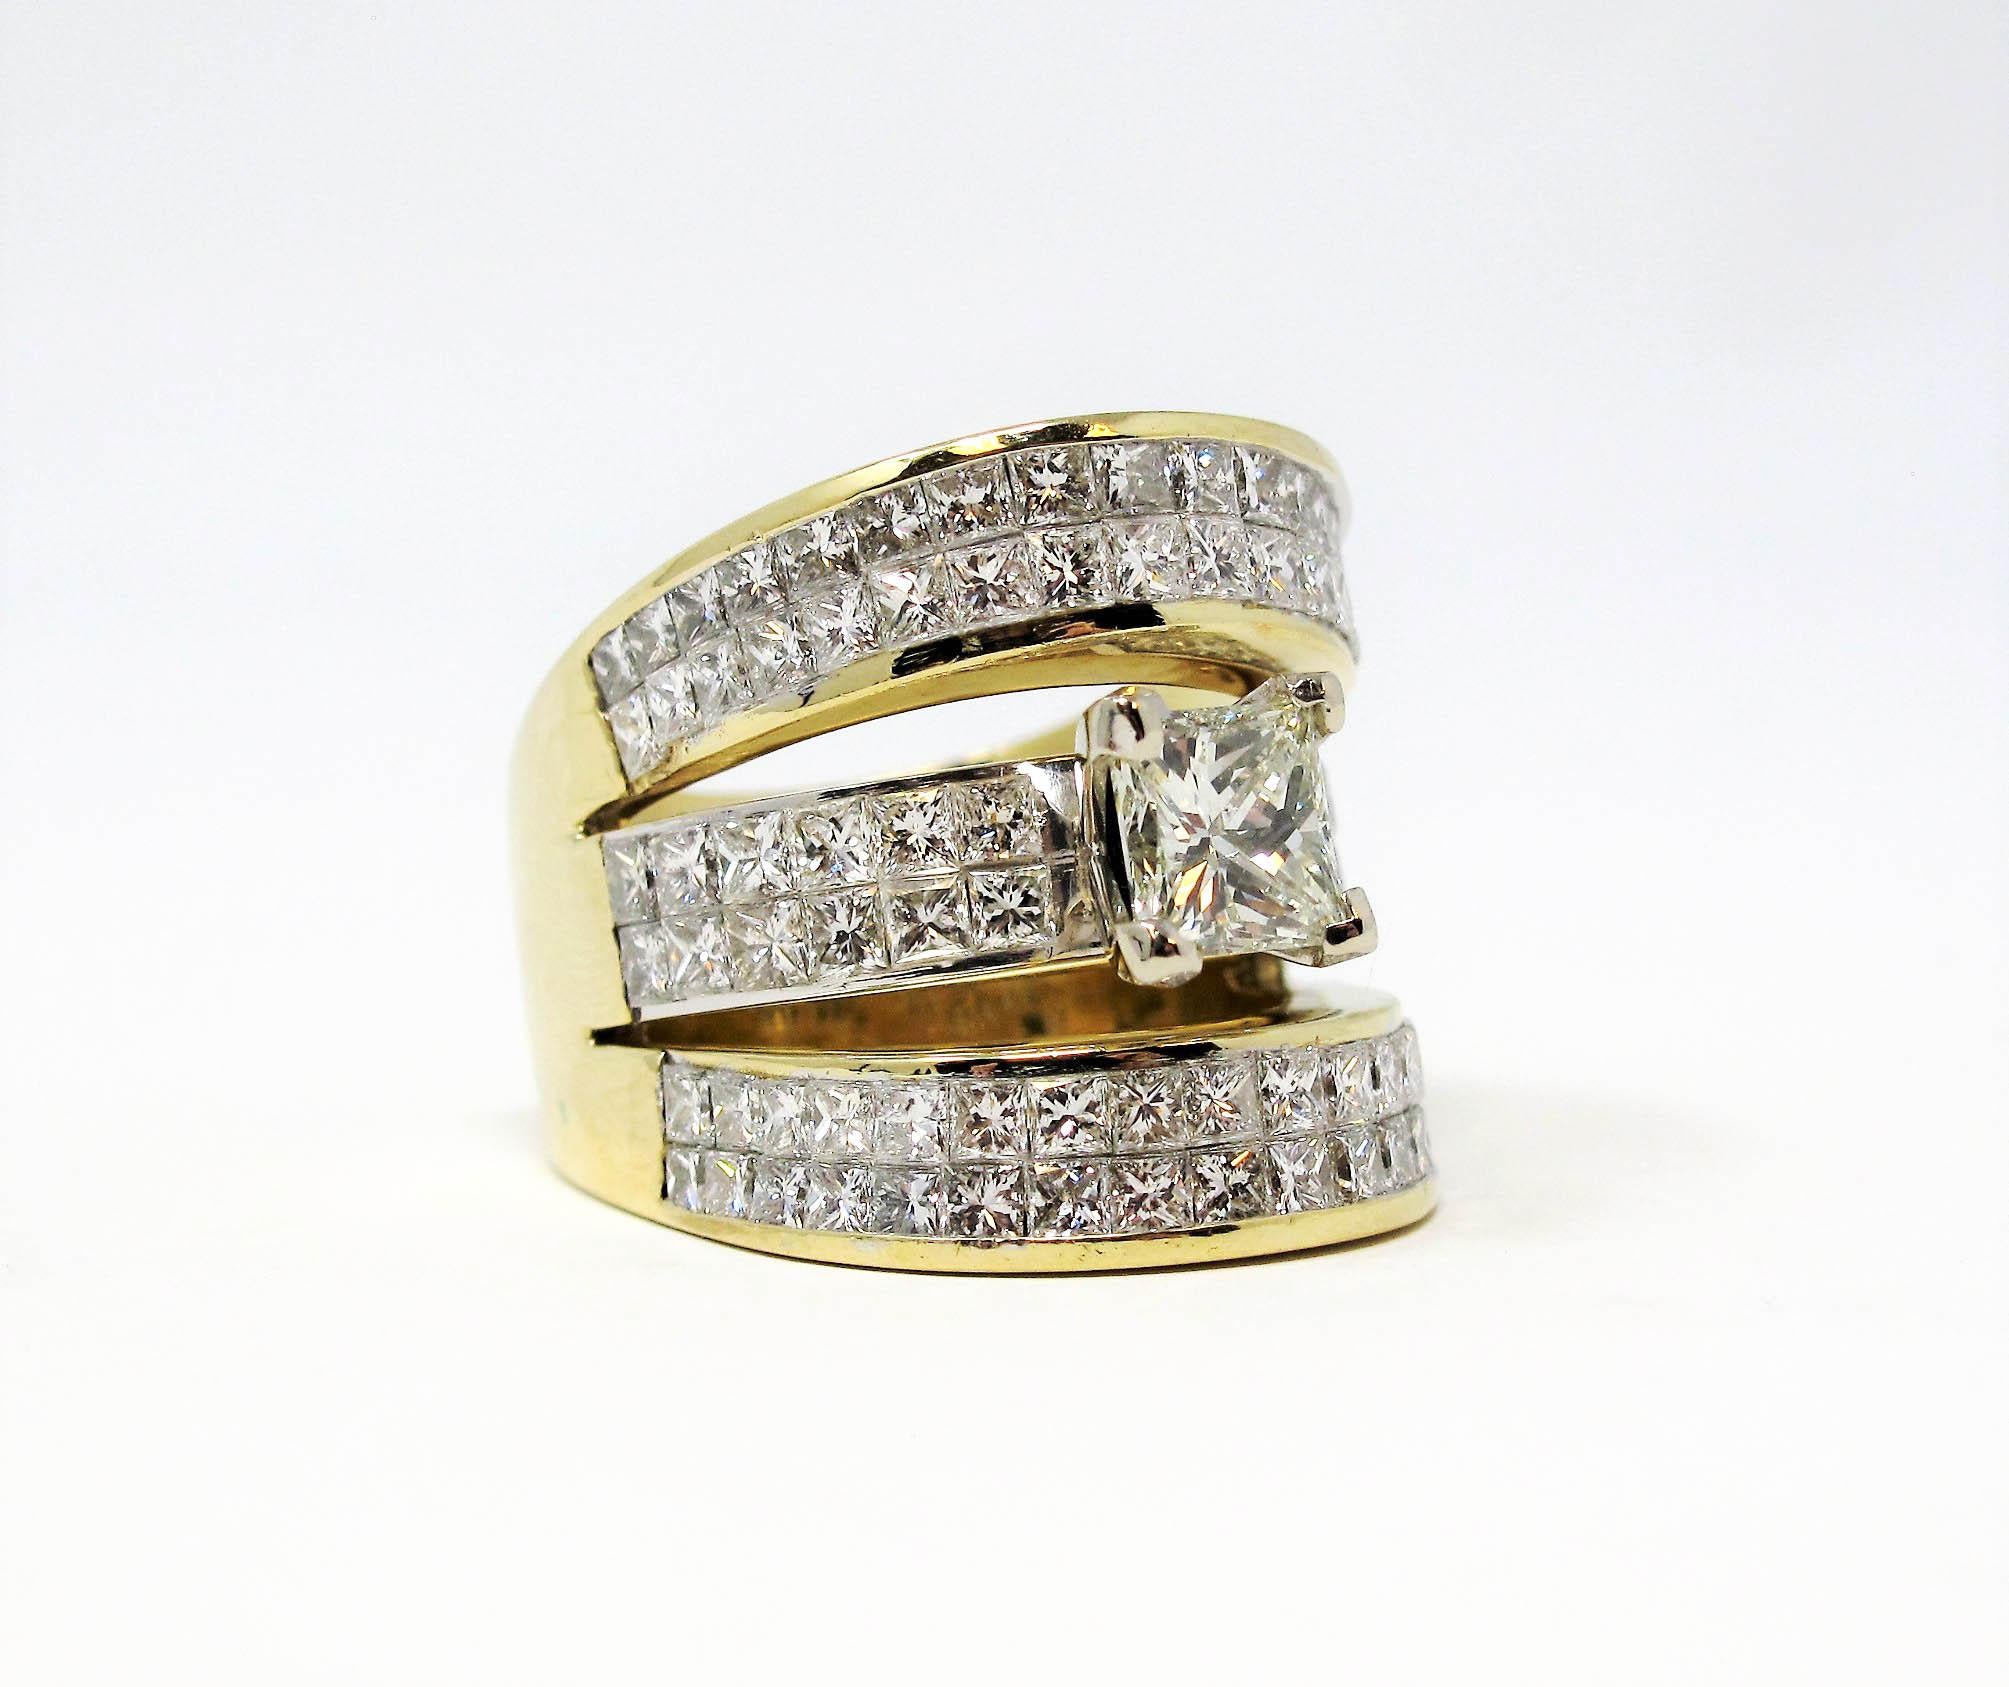 Ring Size: 8.25

This is not your every day statement ring! This magnificent, contemporary style multi-row diamond ring is bursting with sparkle from end to end. The striking ring features a Princess cut center stone accented by three embellished